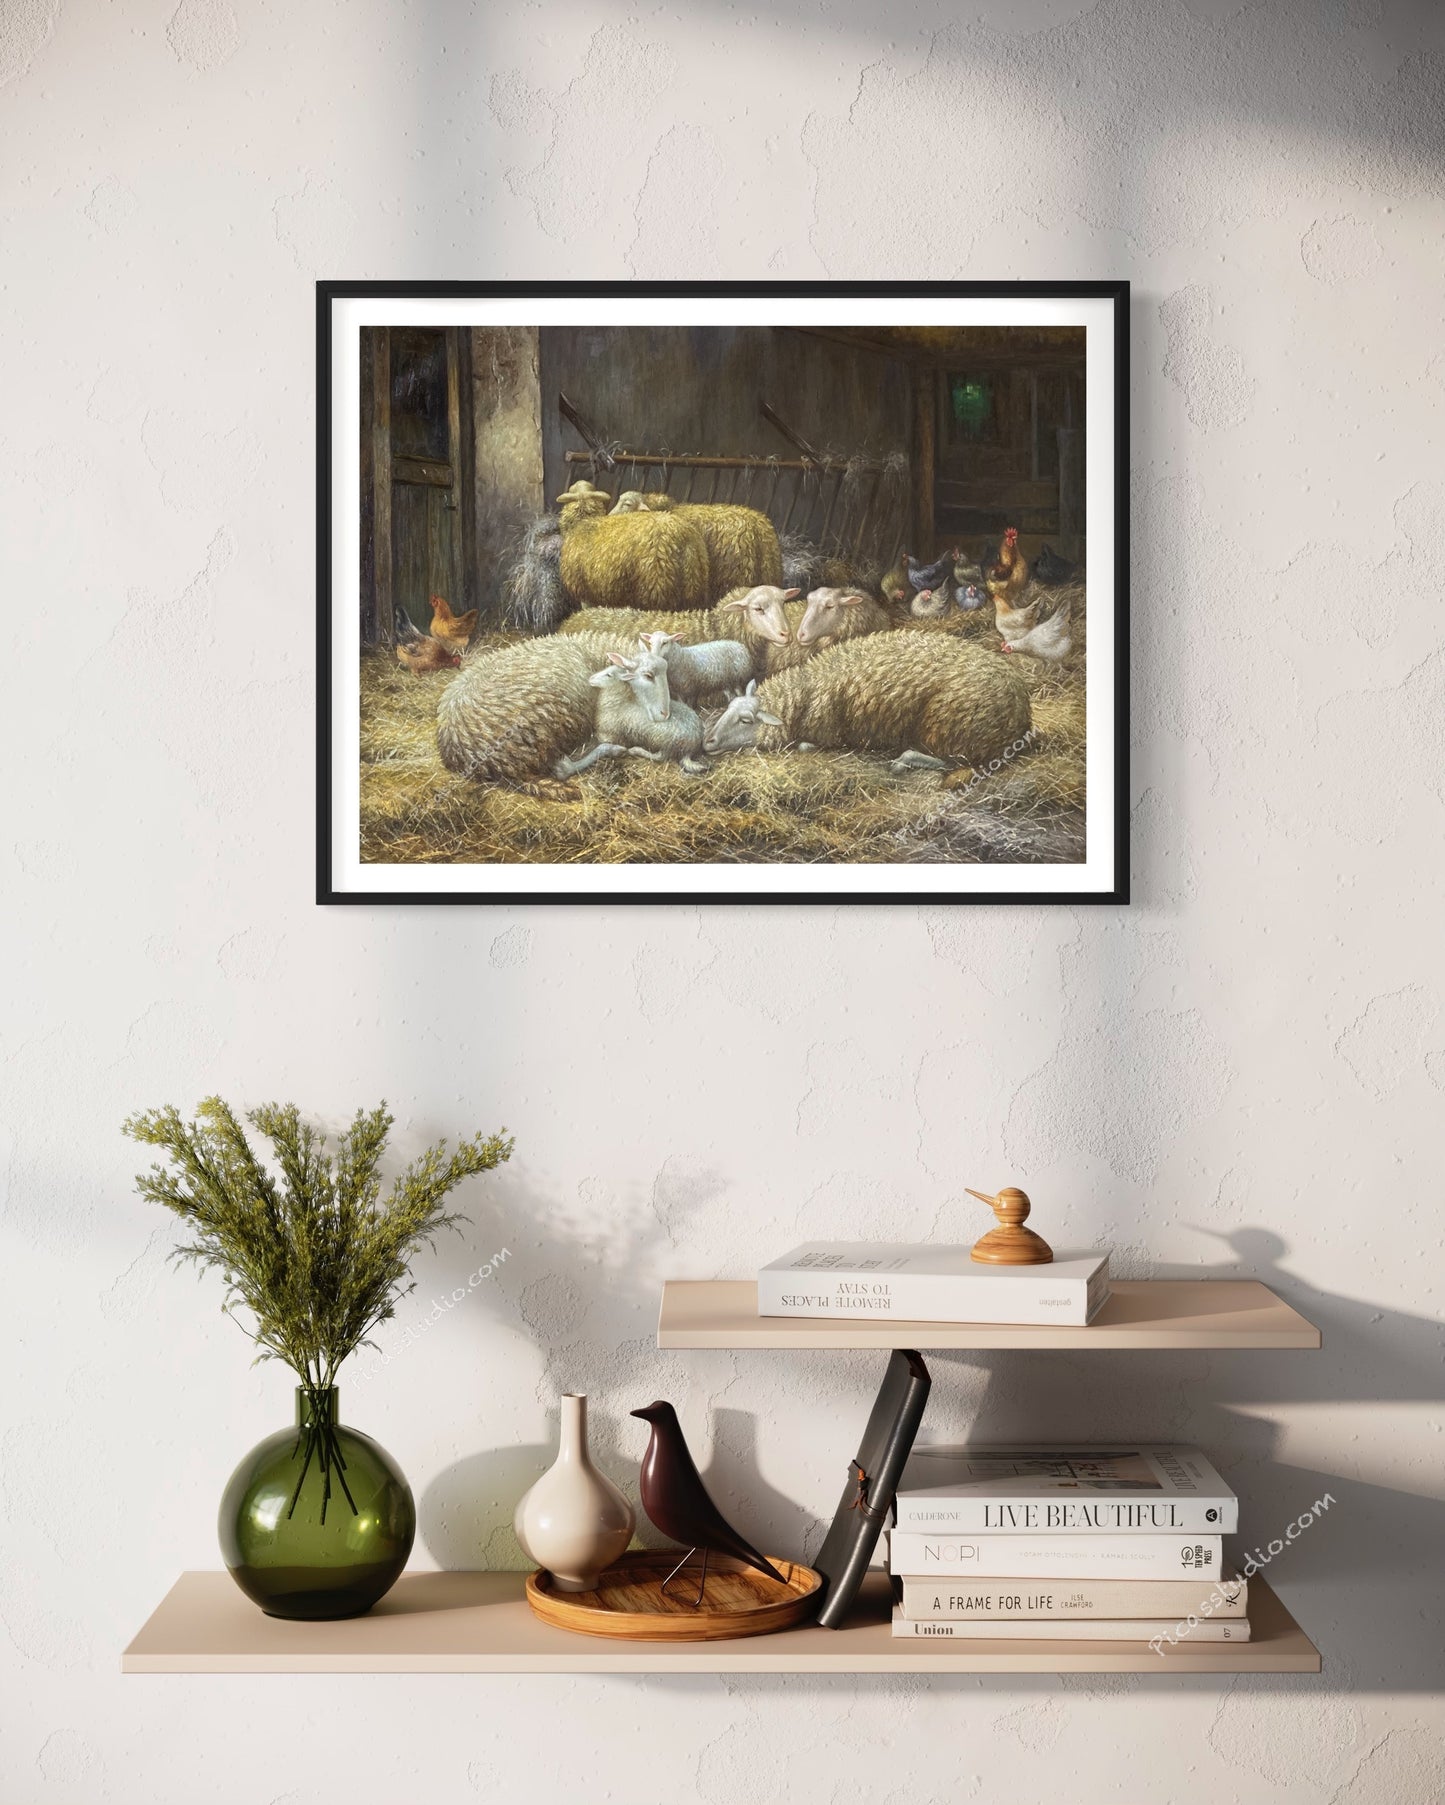 Eugene Remy Maes Sheep and Chicken in a Stable Oil Painting Hand Painted Art on Canvas Wall Decor Unframed